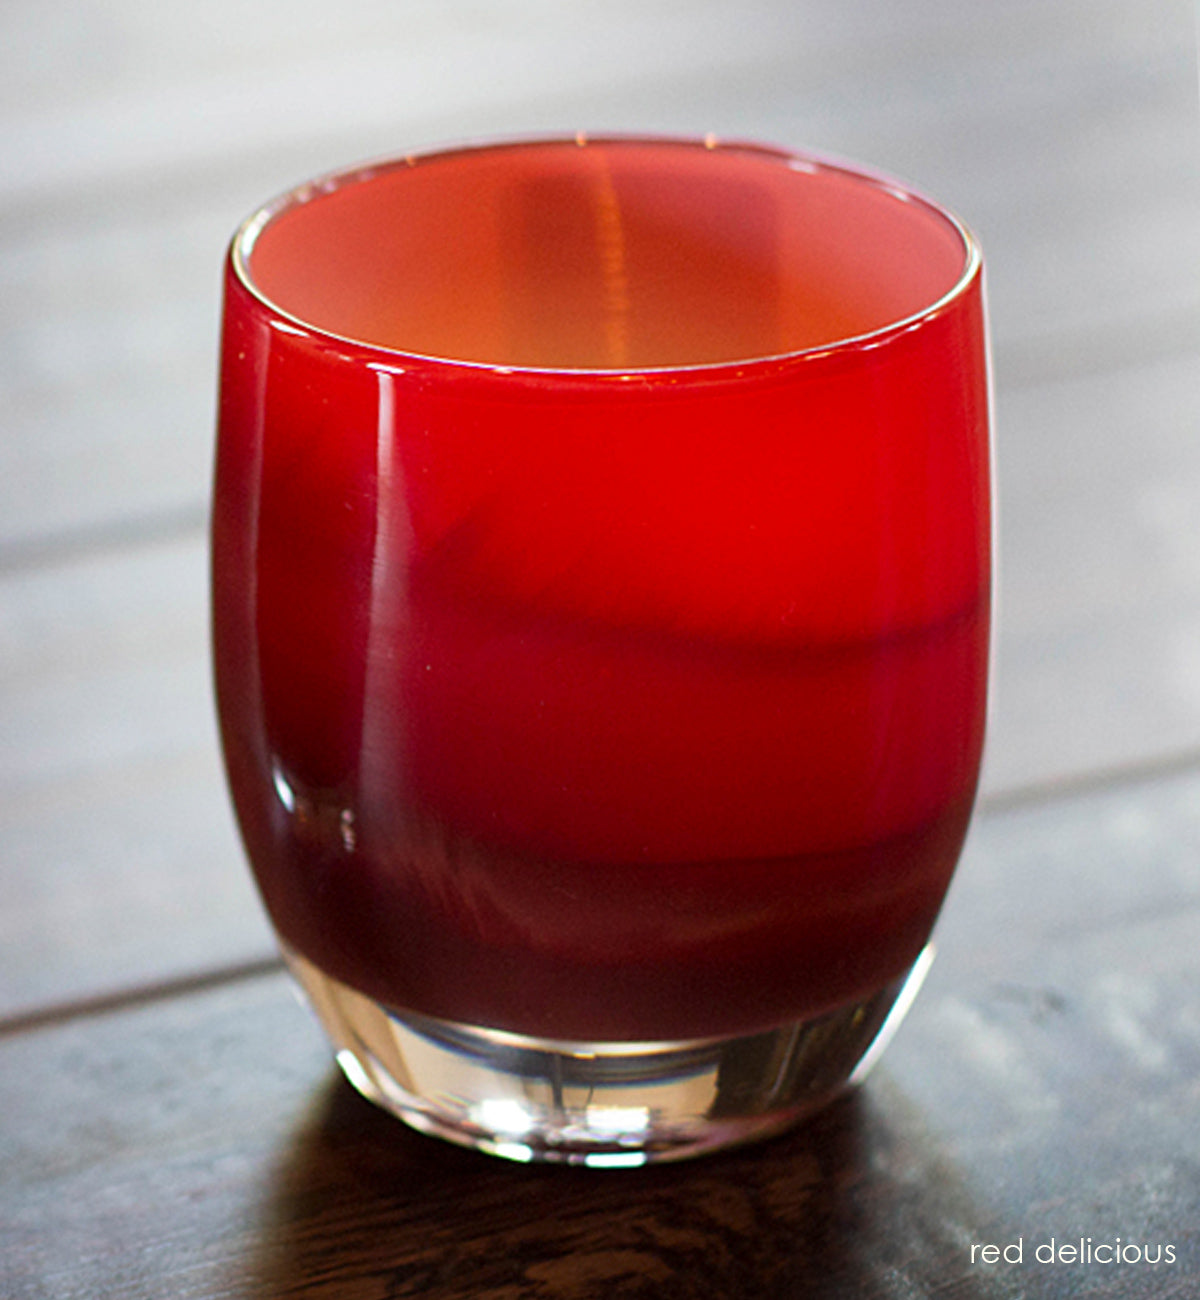 red delicious, bright red hand-blown glass candle holder with a stark white interior.